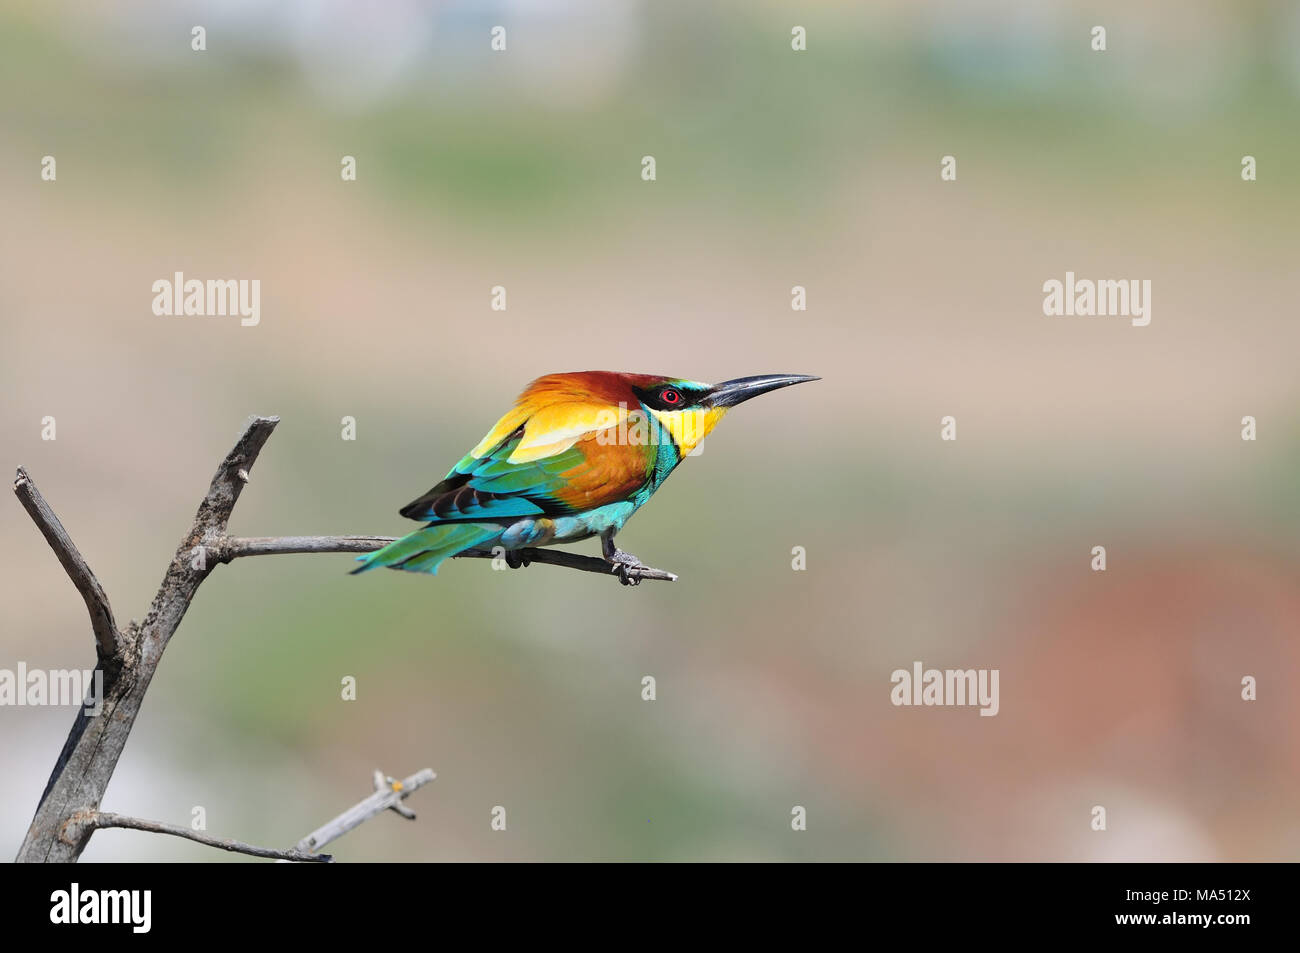 European bee-eater (Merops apiaster) (resembling a painted parallelogram) sits on a dry branch. Stock Photo